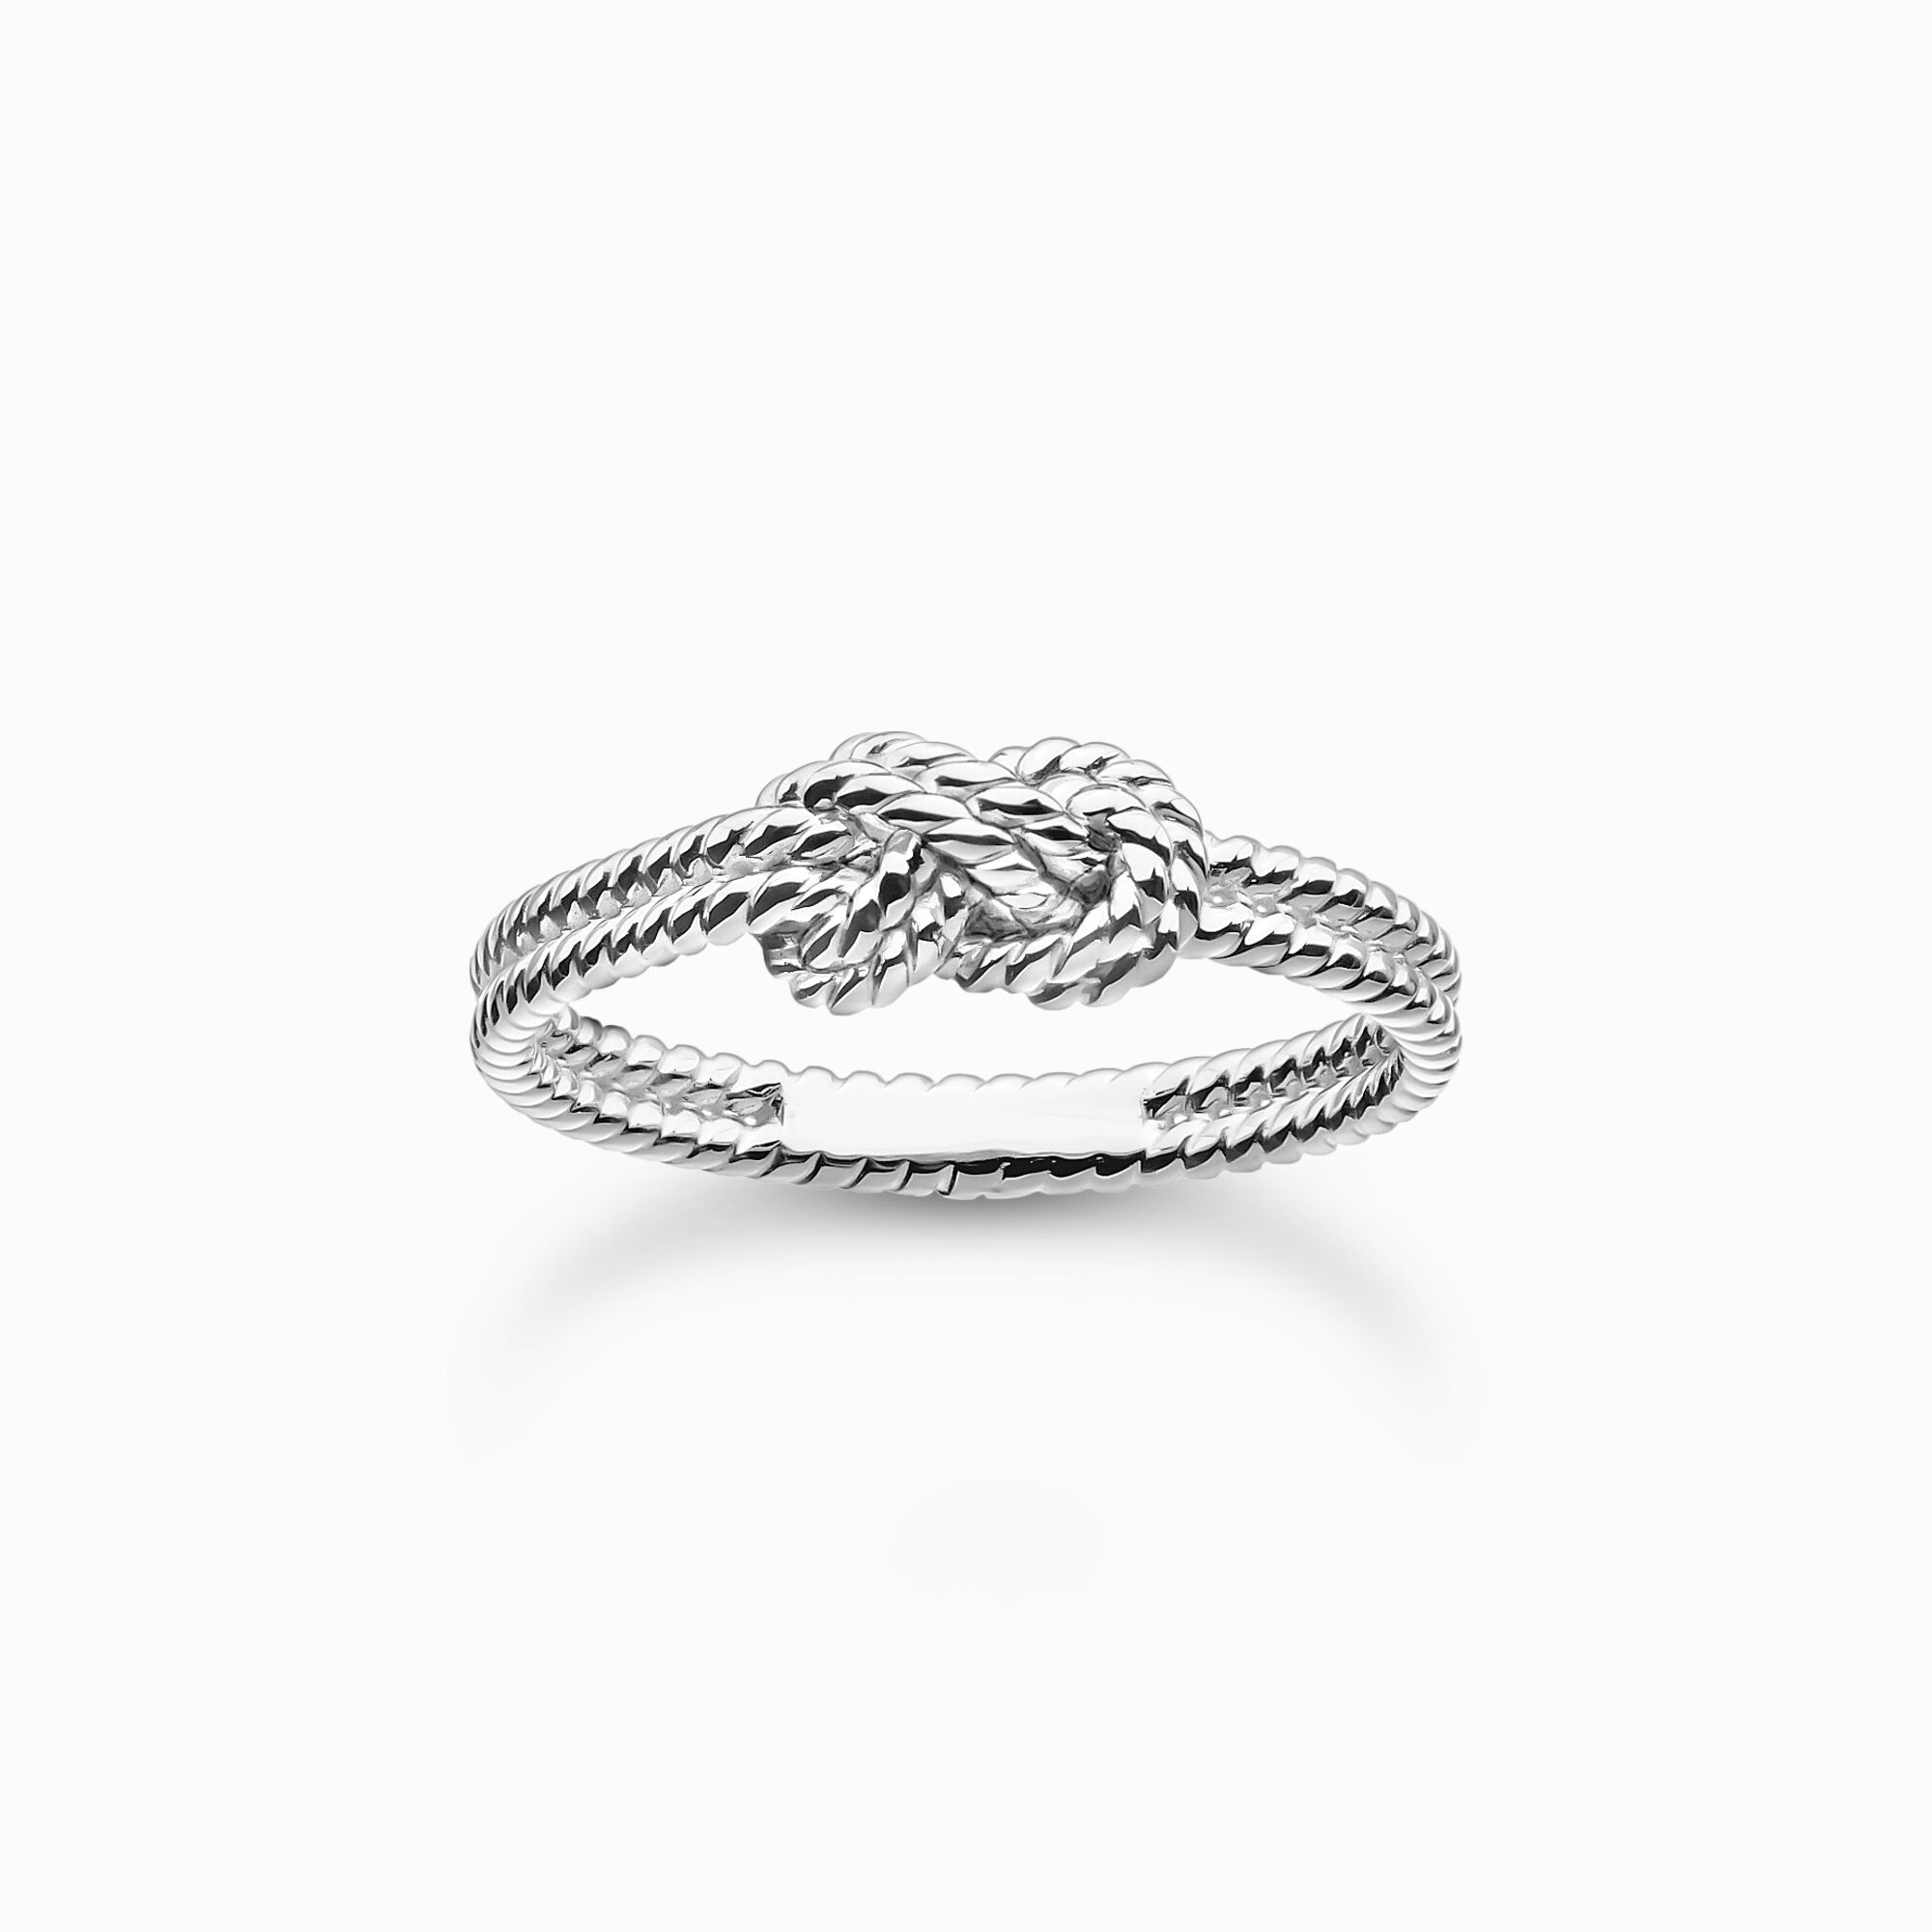 Ring rope with knot silver from the Charming Collection collection in the THOMAS SABO online store